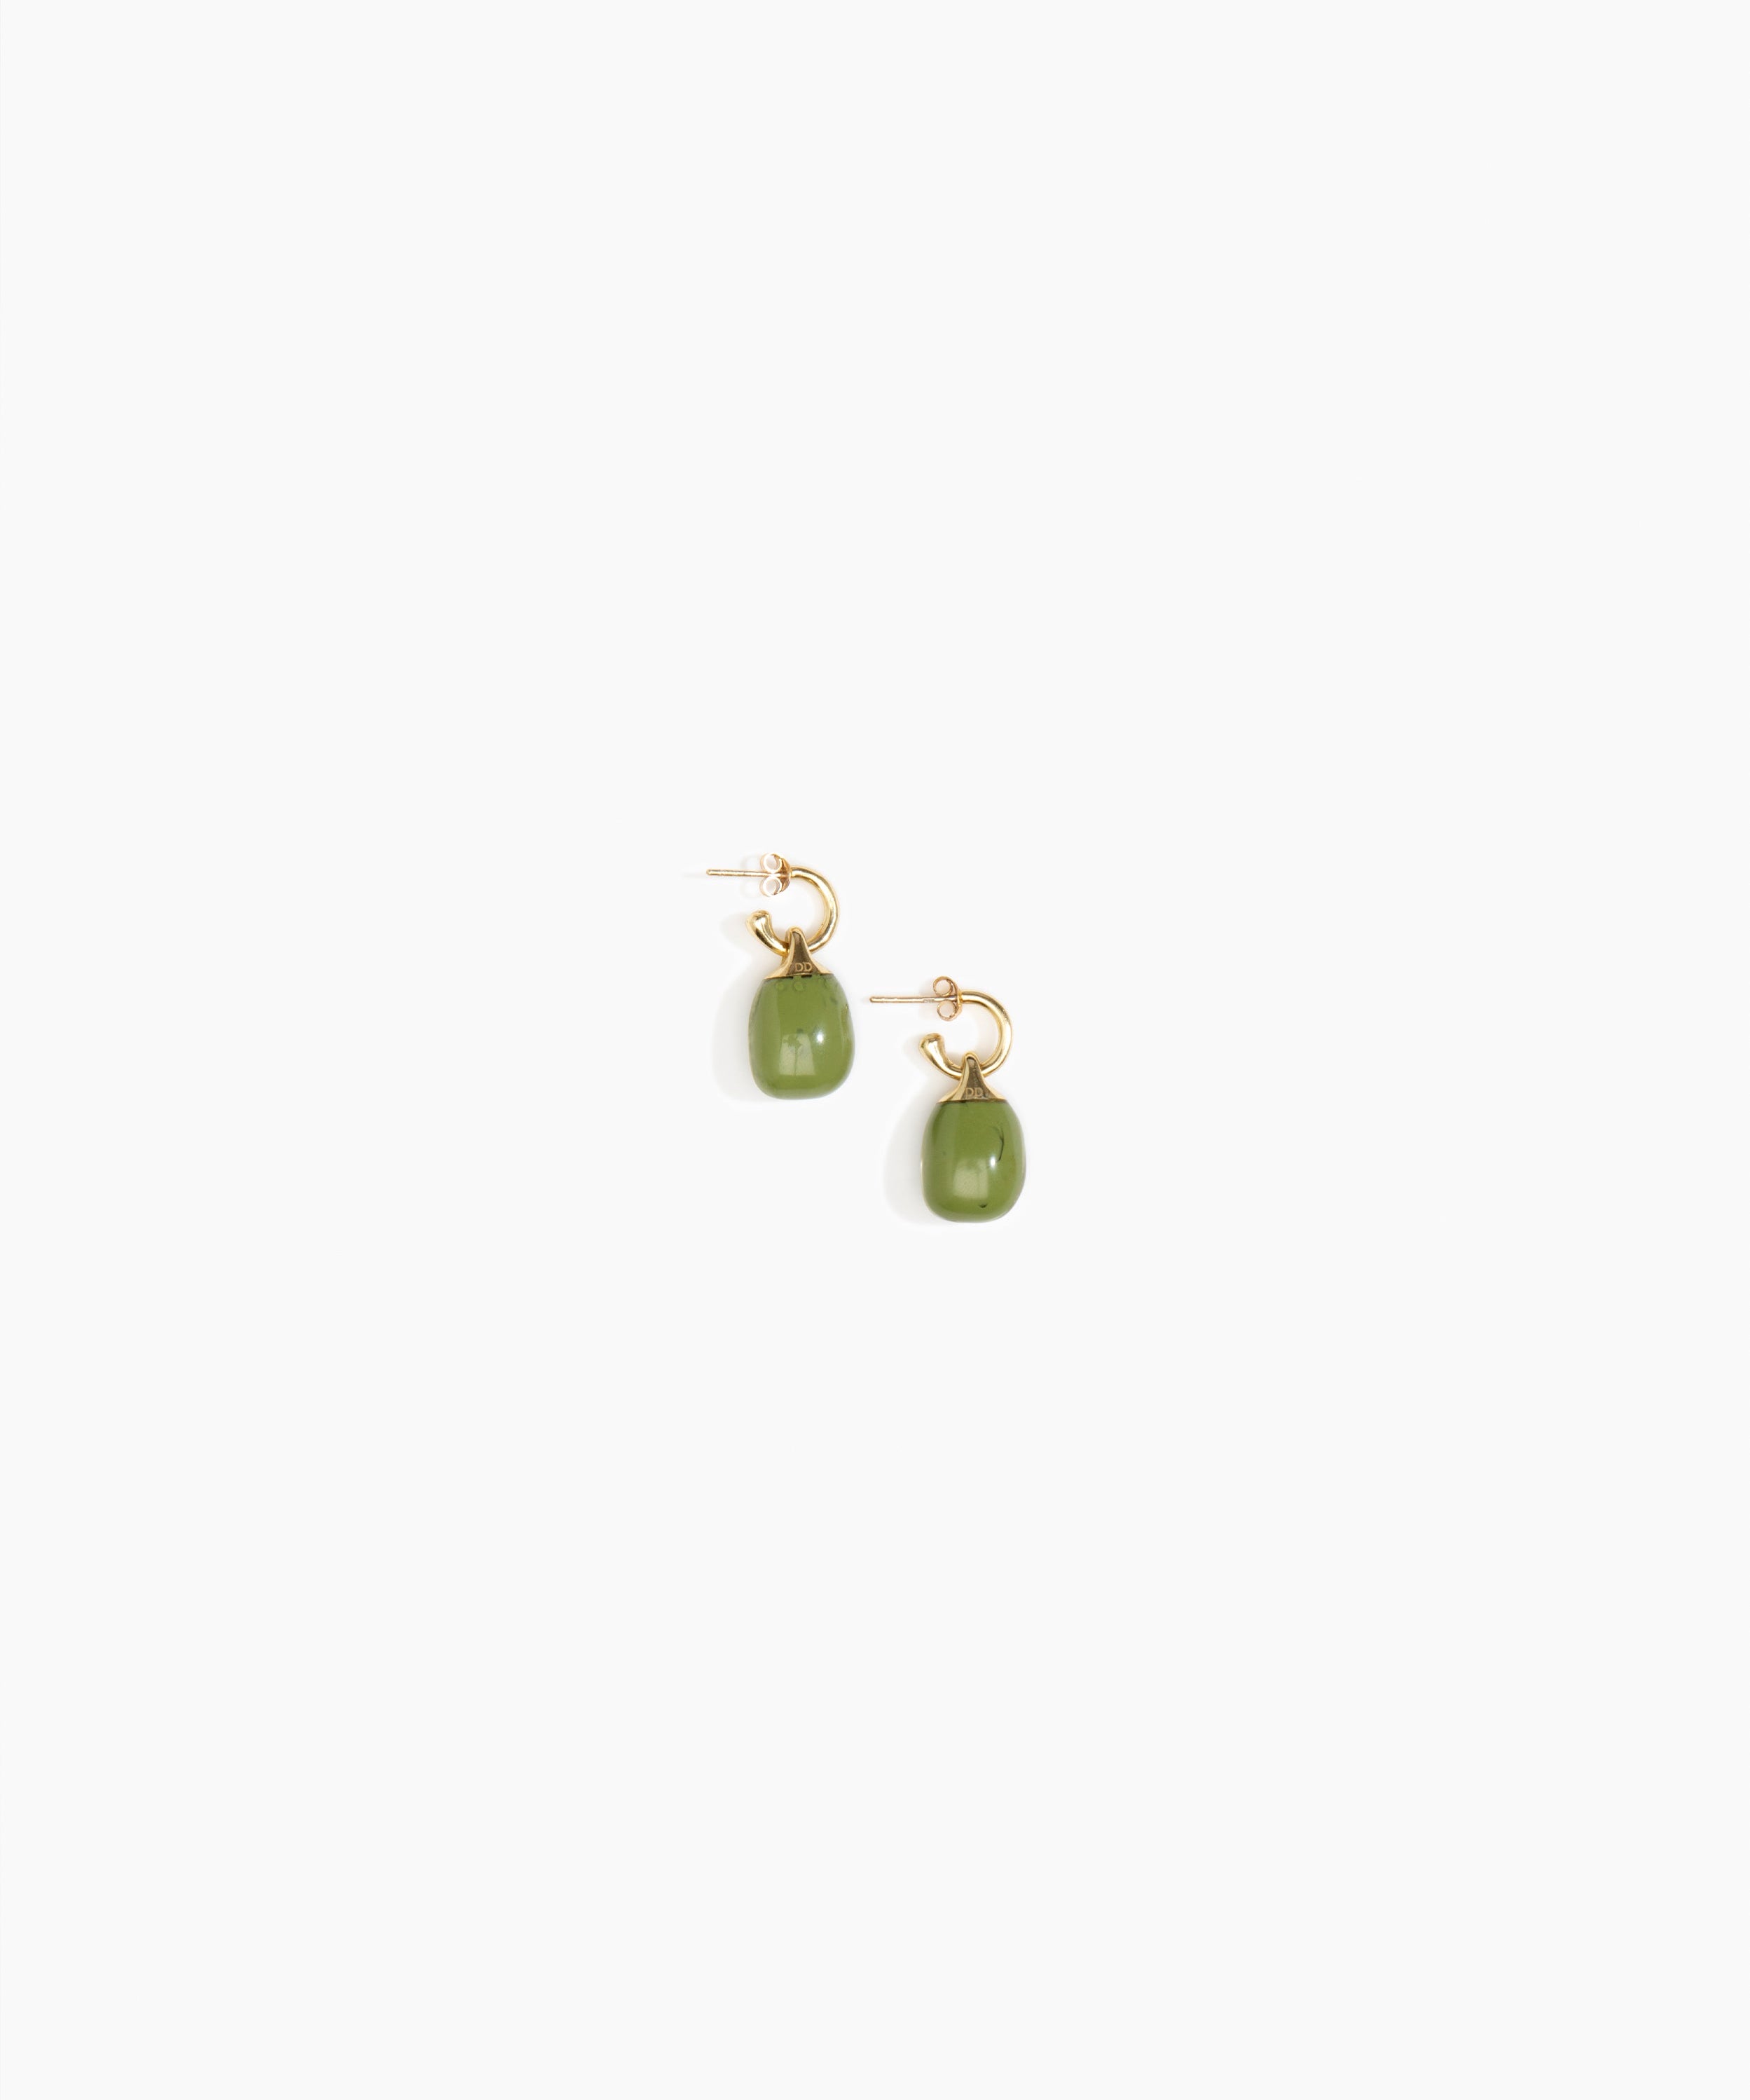 Dinosaur Designs Small River Rock Hoops Earrings in Olive color resin with Brass Hoop Material